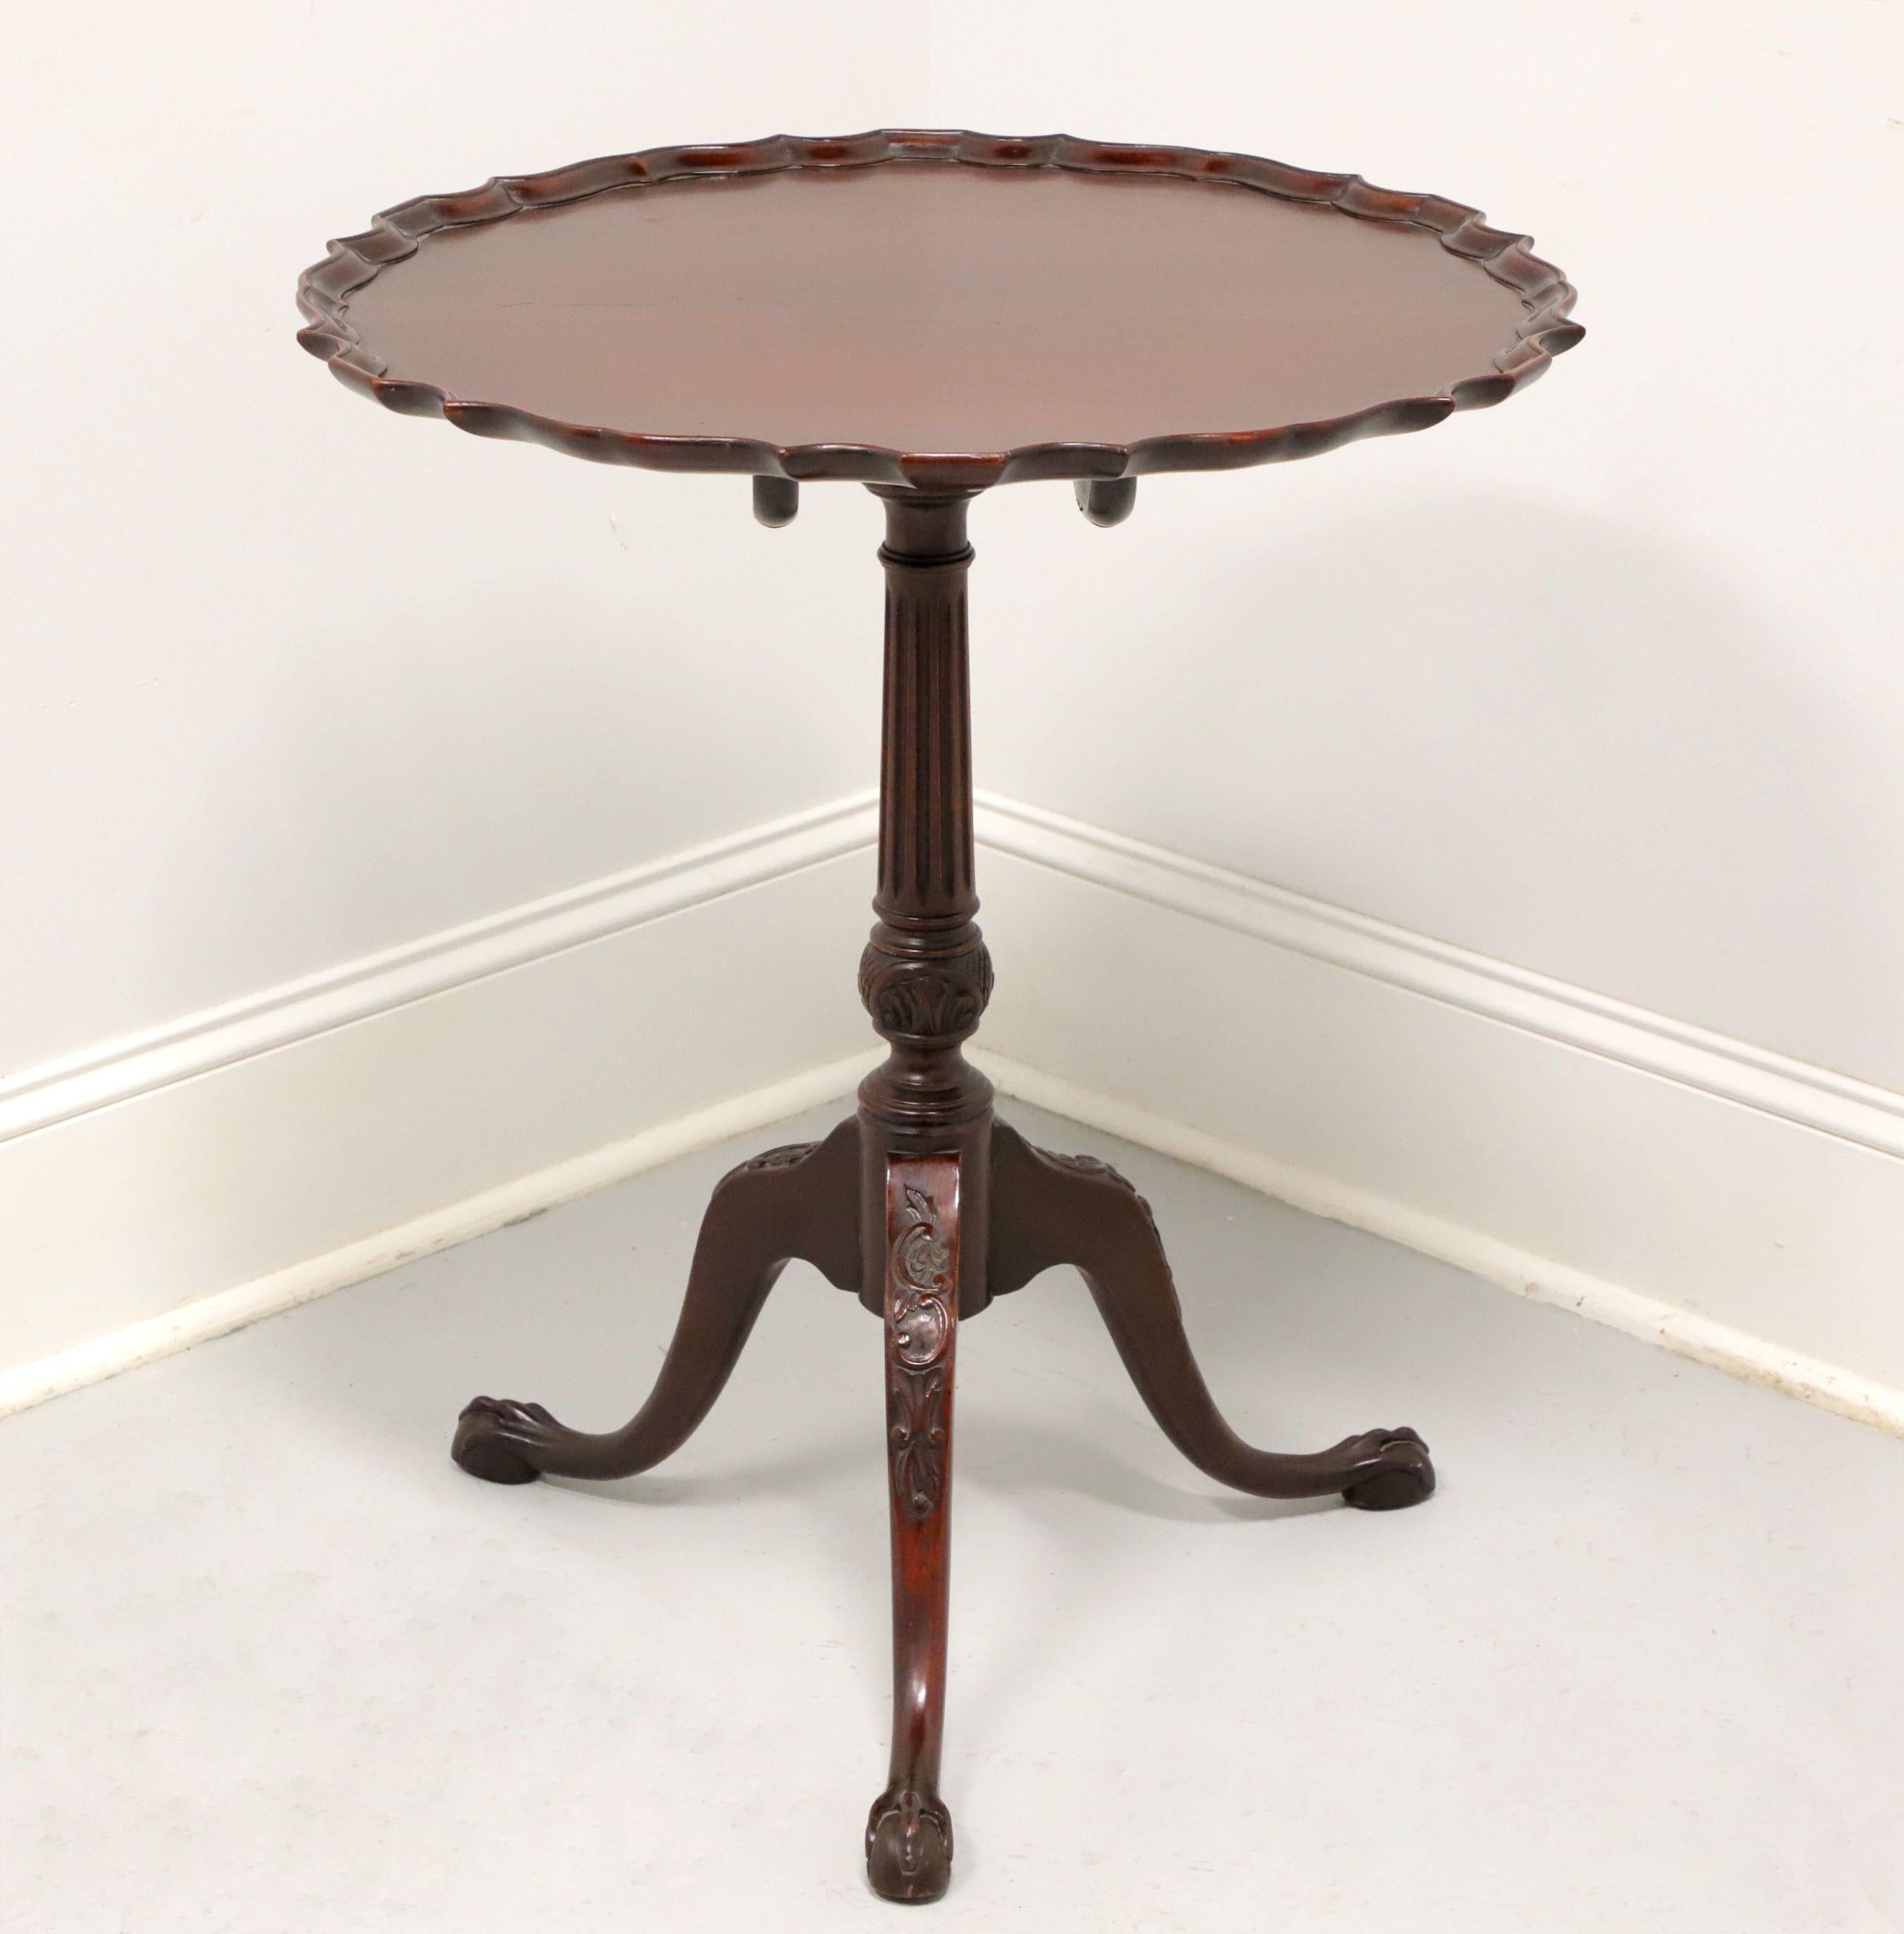 An antique Chippendale style tilt-top pie crust table by Ware & Co, from their Collectors Group. Handmade of solid mahogany with scalloped edge top, tilt mechanism, brass latch, turned & fluted pedestal, three legs with carved knees and ball in claw